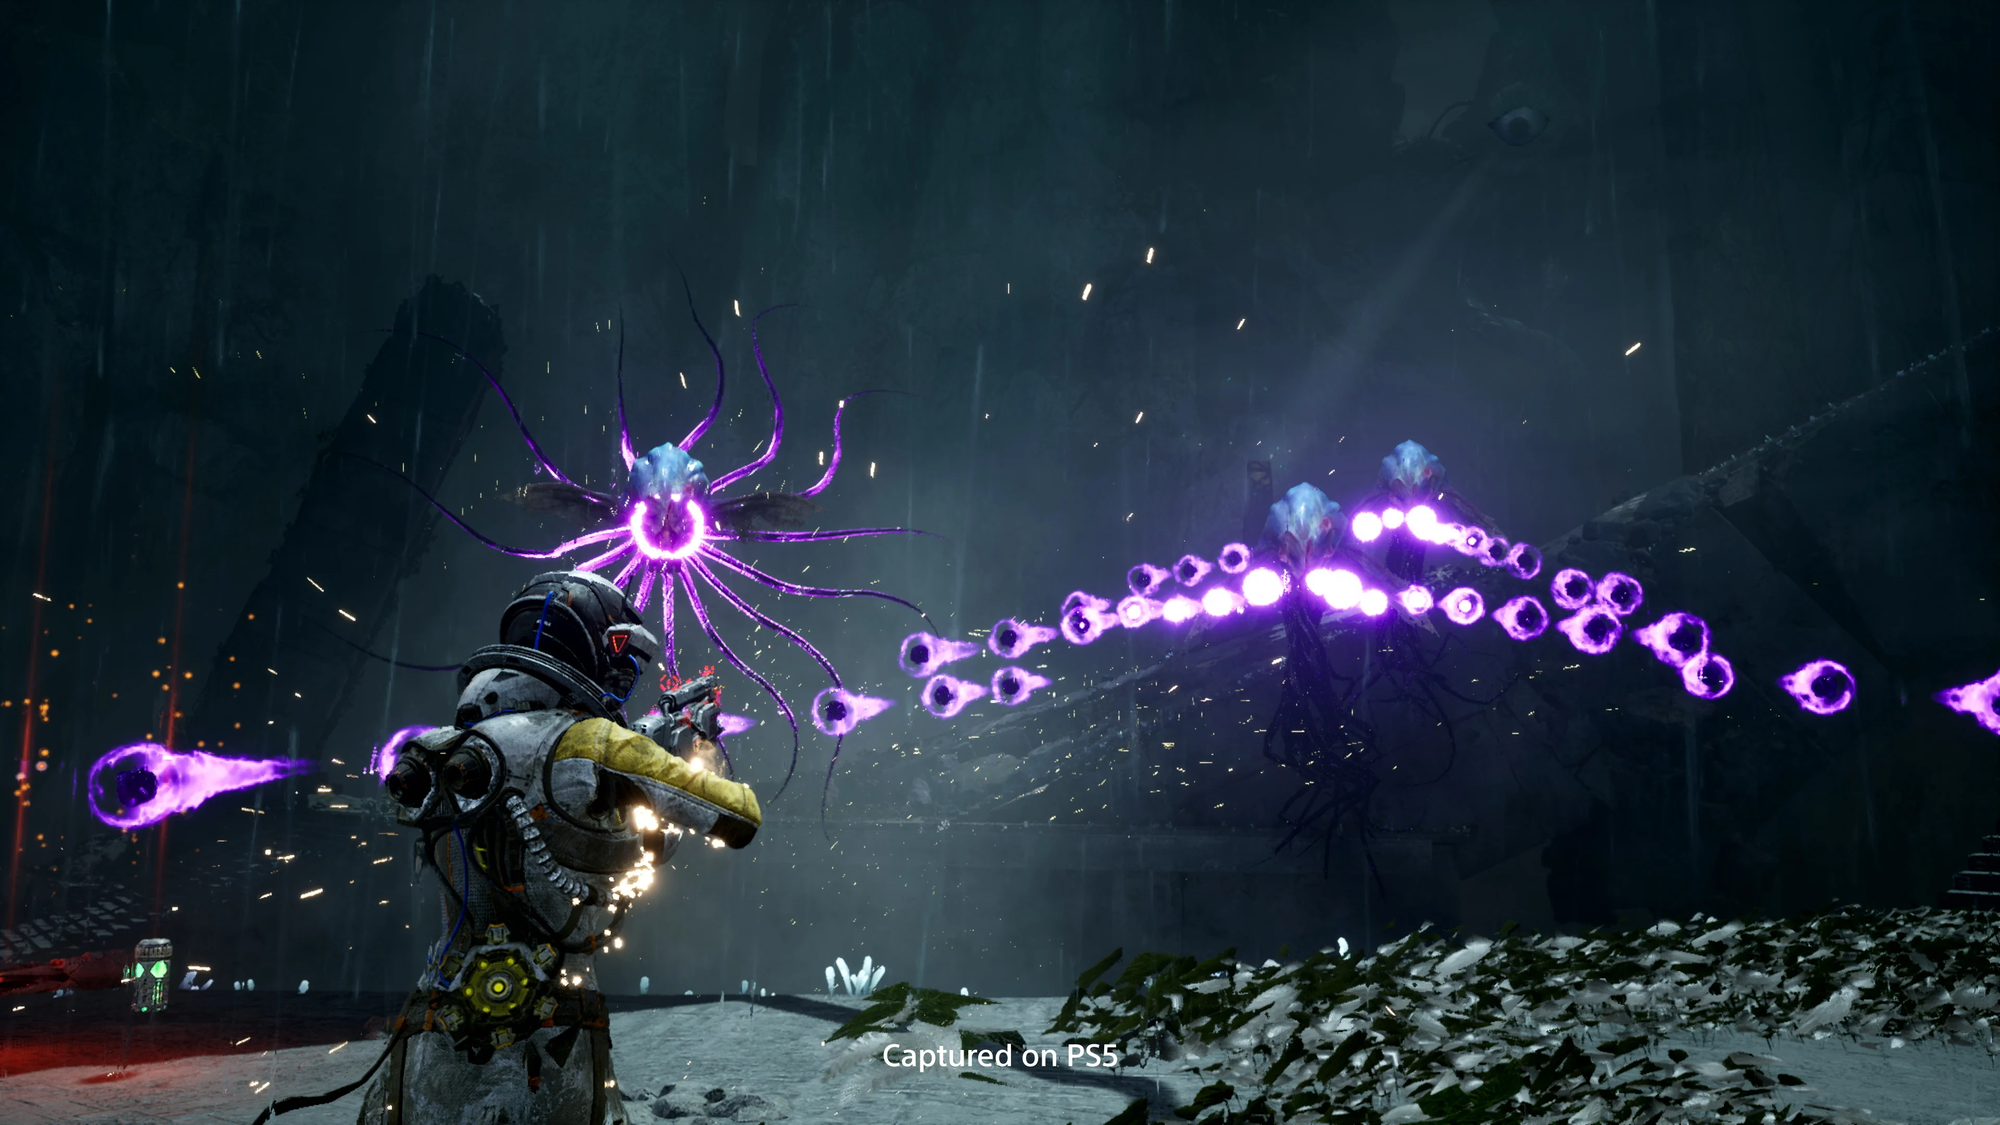 Gameplay of Selene fighitng off hostile life that is shooting a large amoint of purple projectiles.